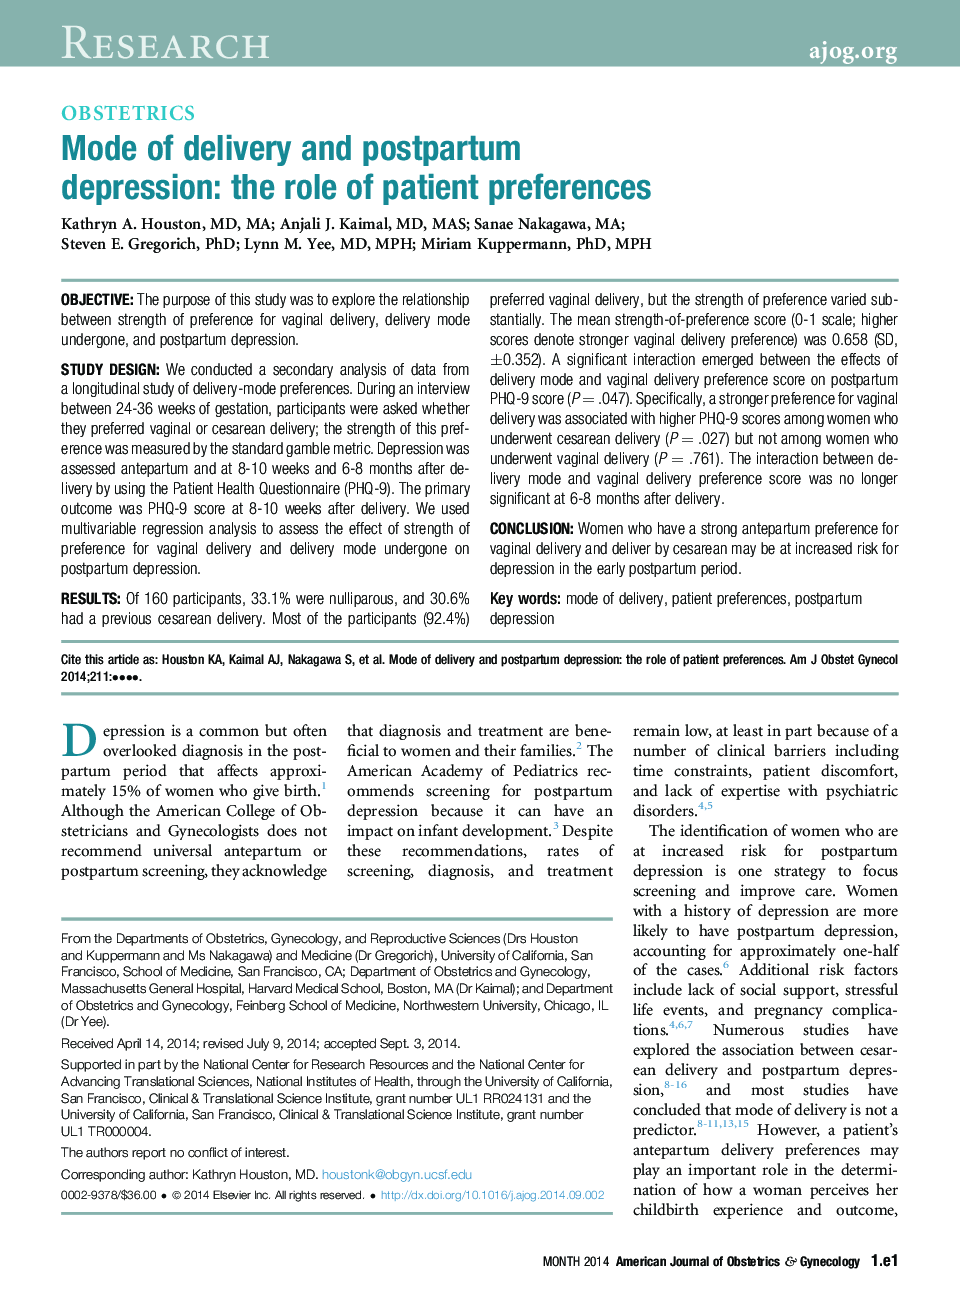 Mode of delivery and postpartum depression: the role of patient preferences